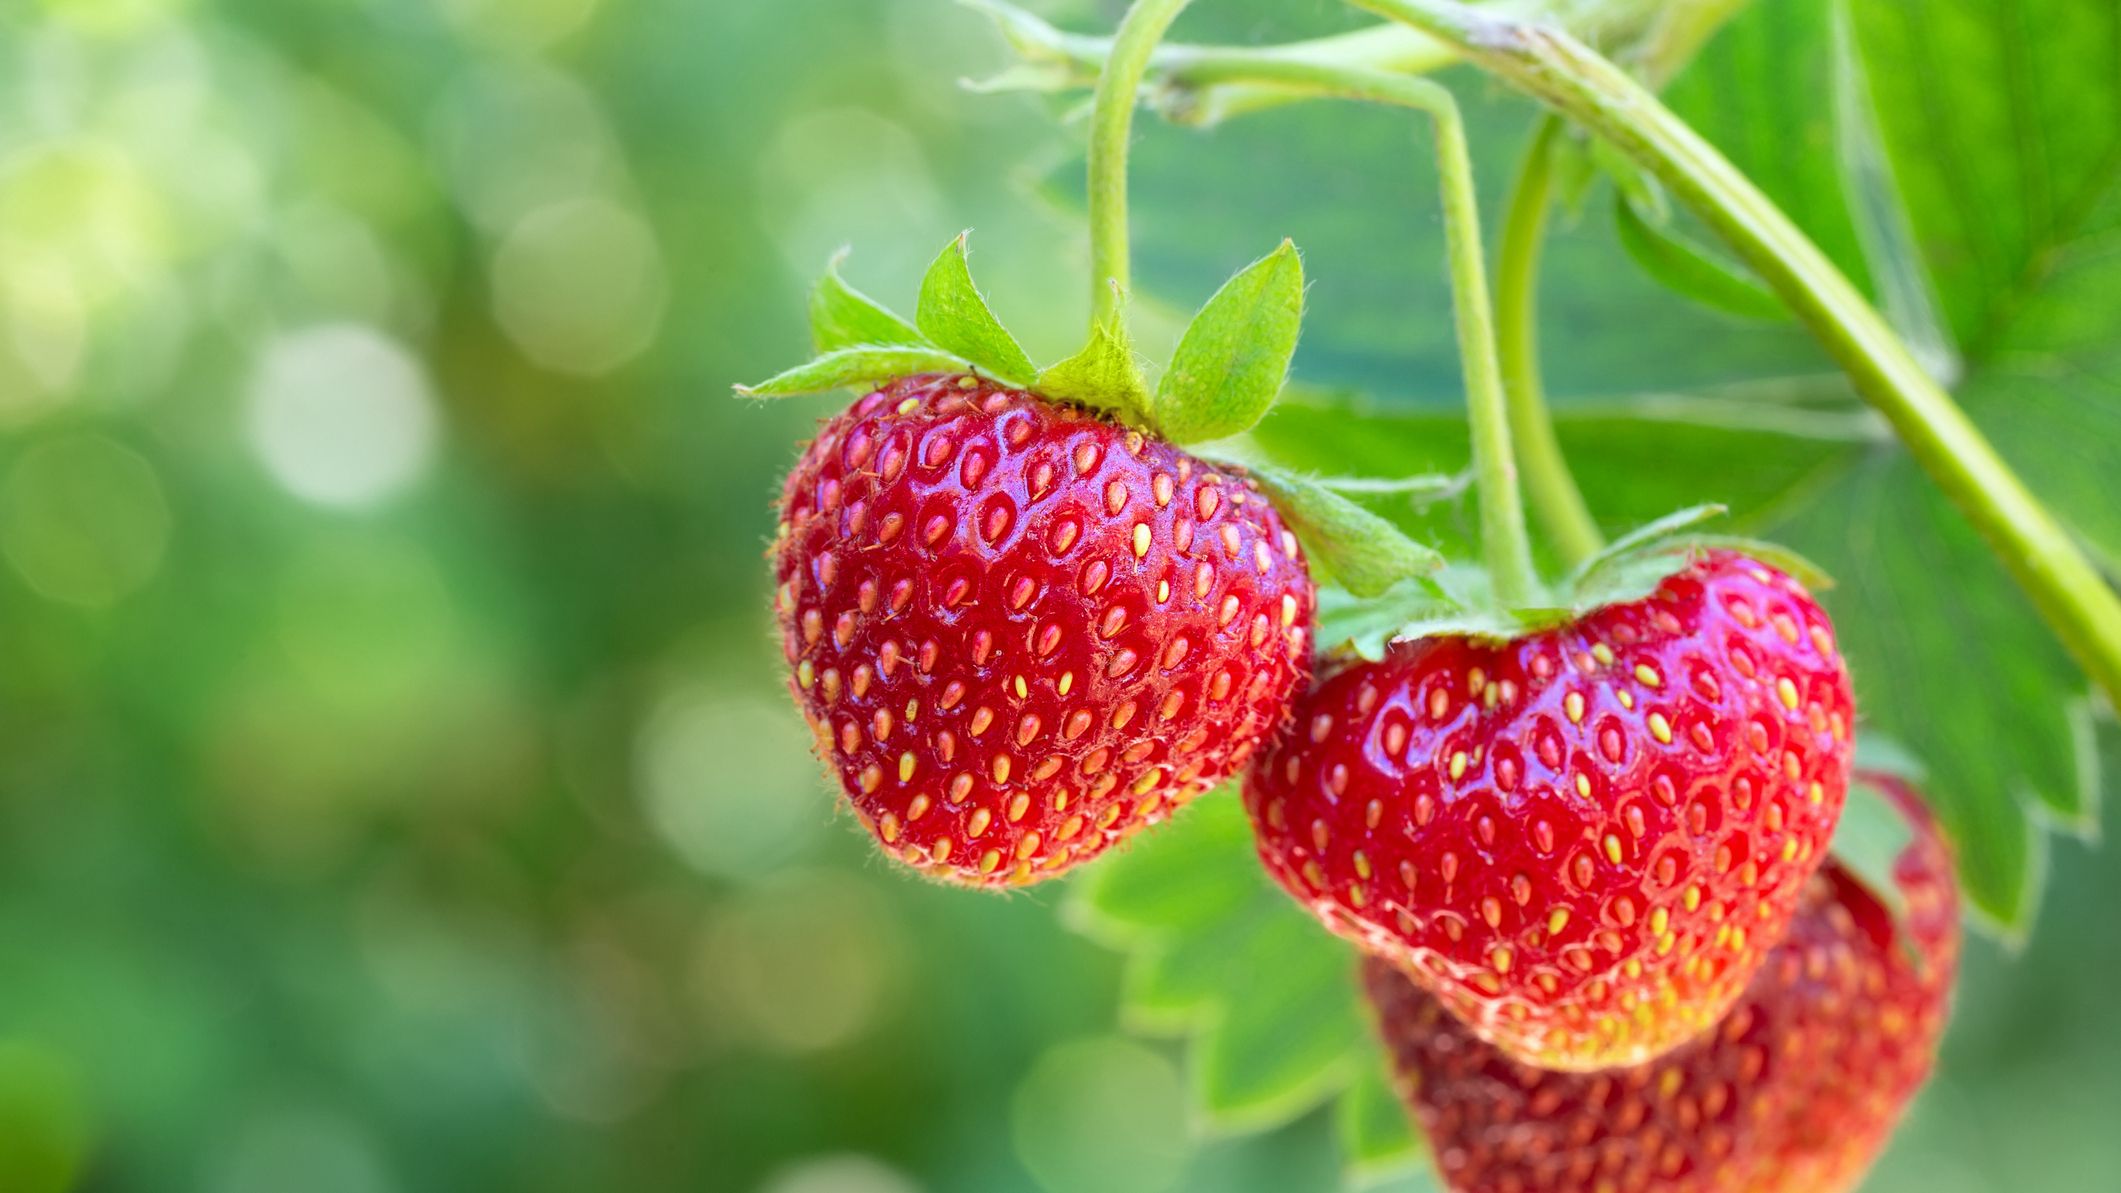 Strawberries: Planting, Growing, and Harvesting Strawberries at Home